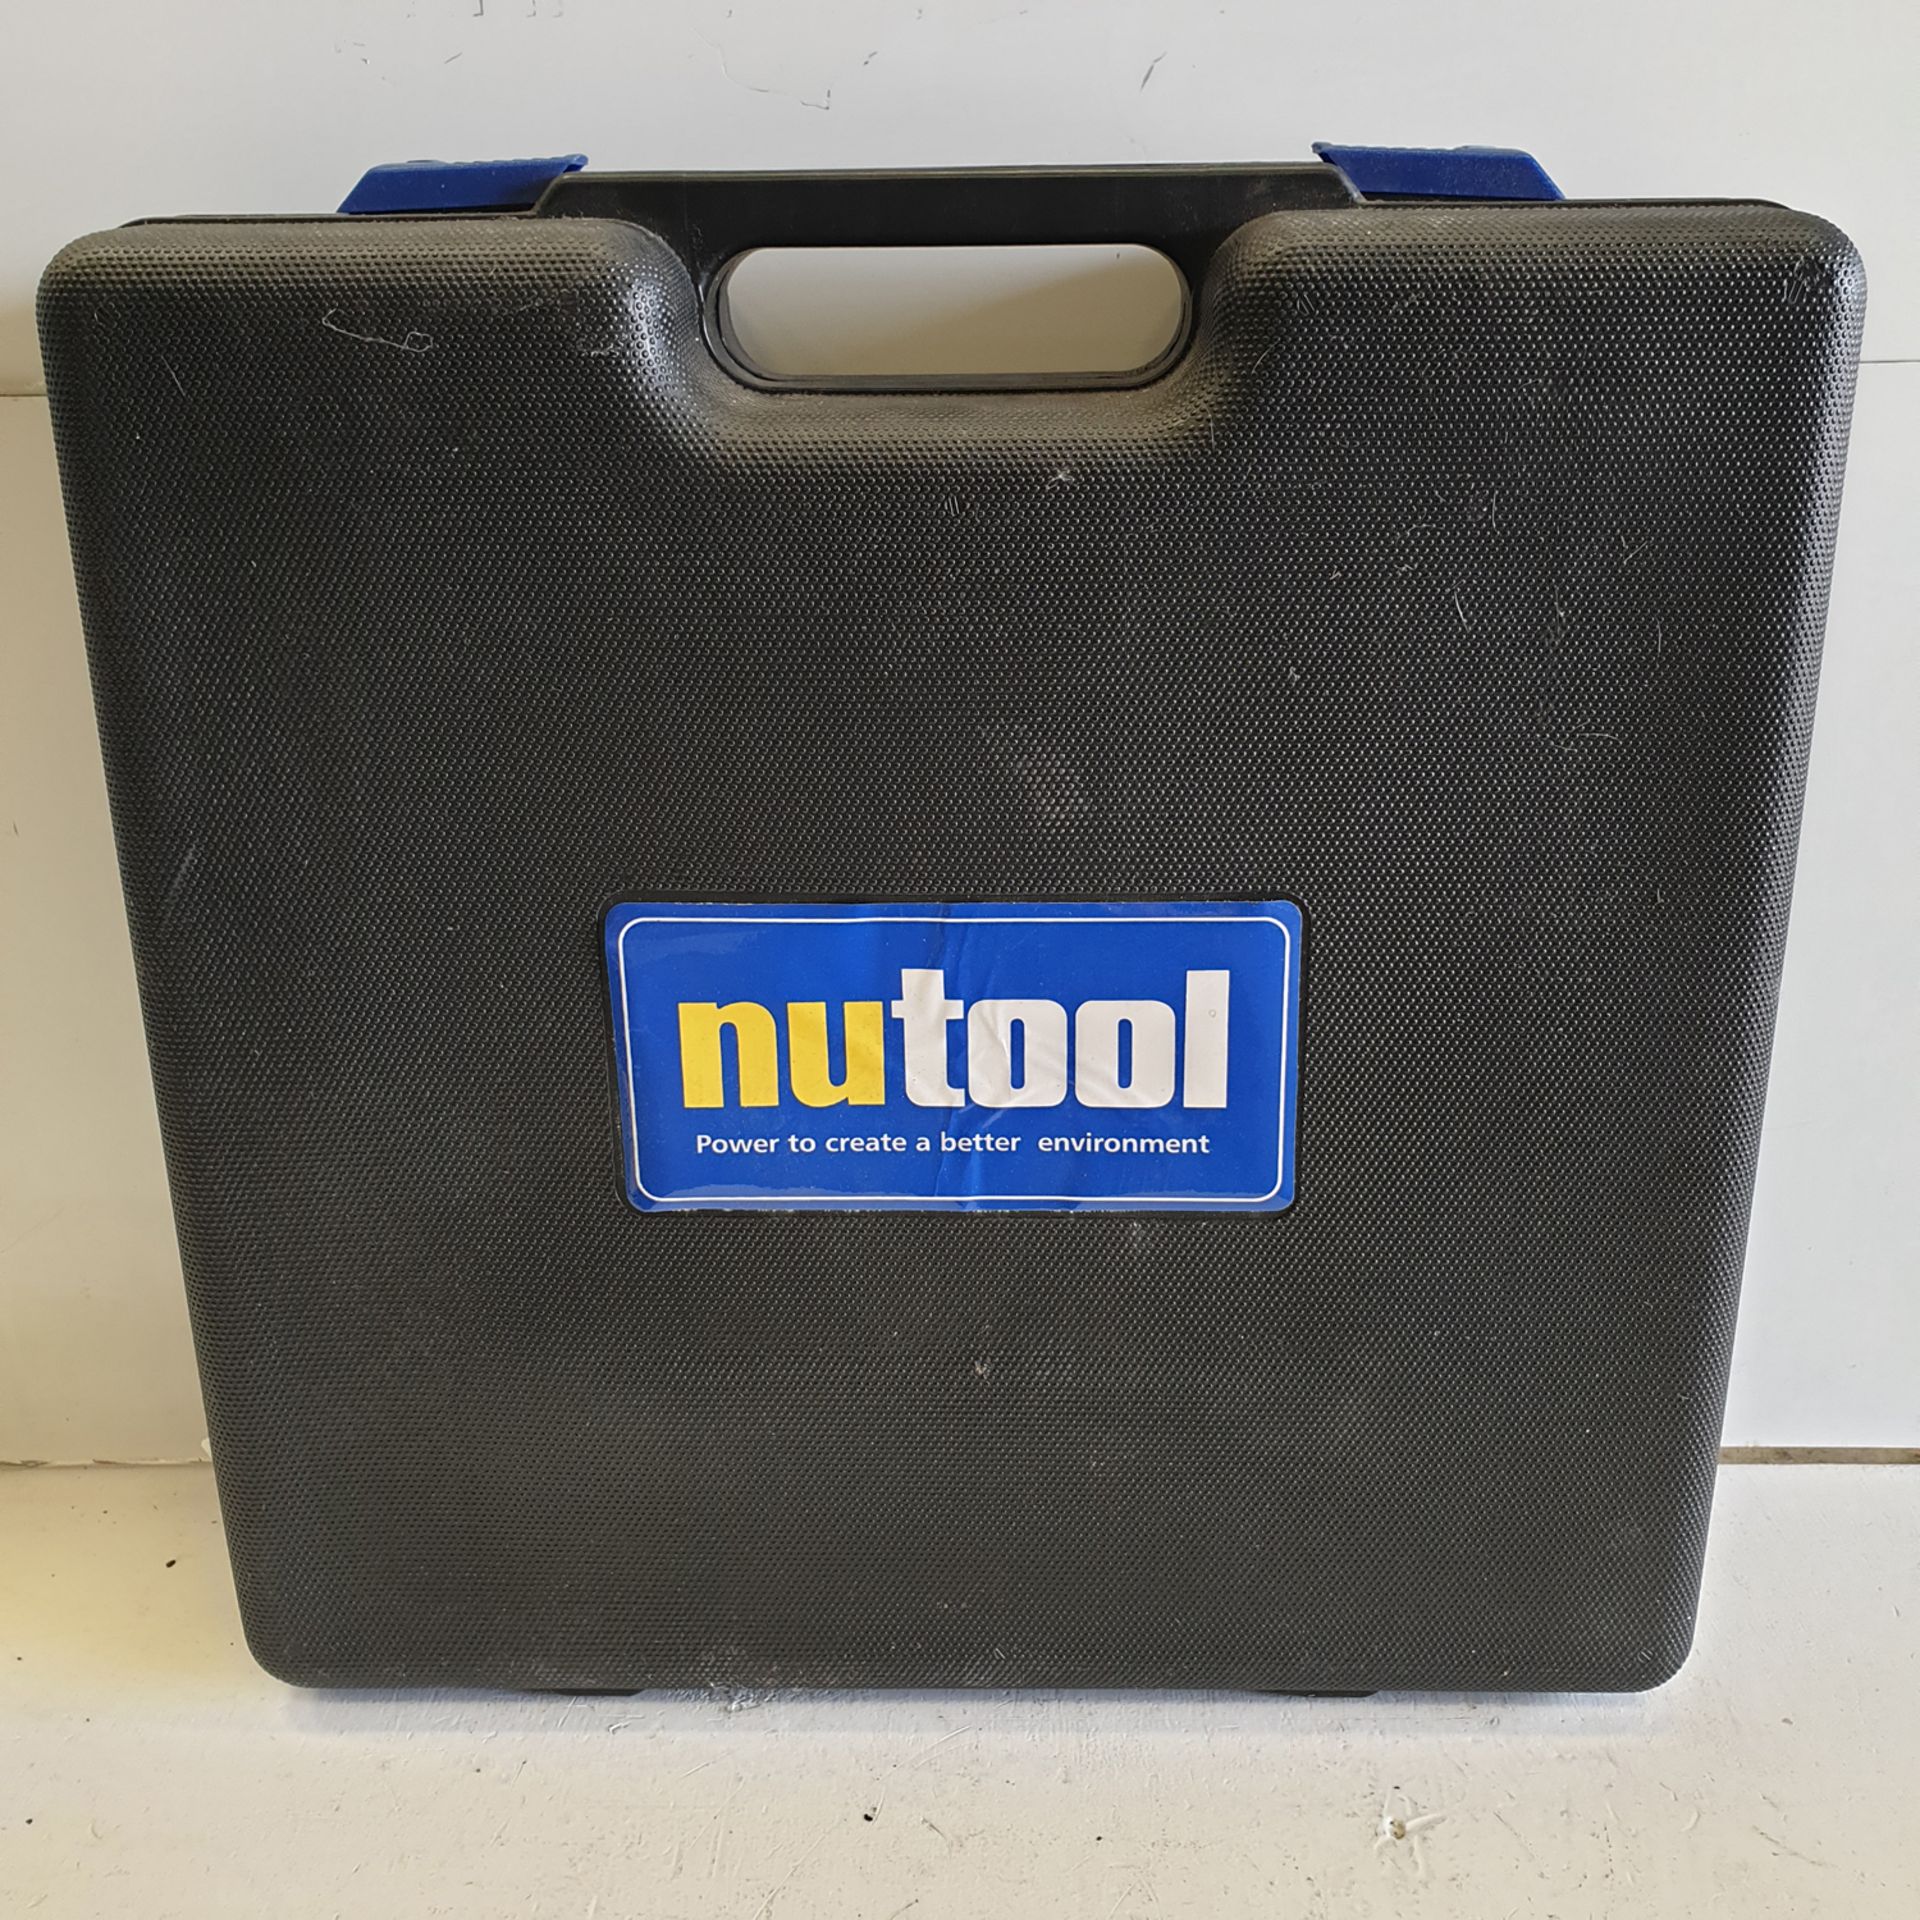 nutool Model NTCD36A 36V Cordless Drill. With Battery & Drill Bits. In Box. - Image 6 of 6